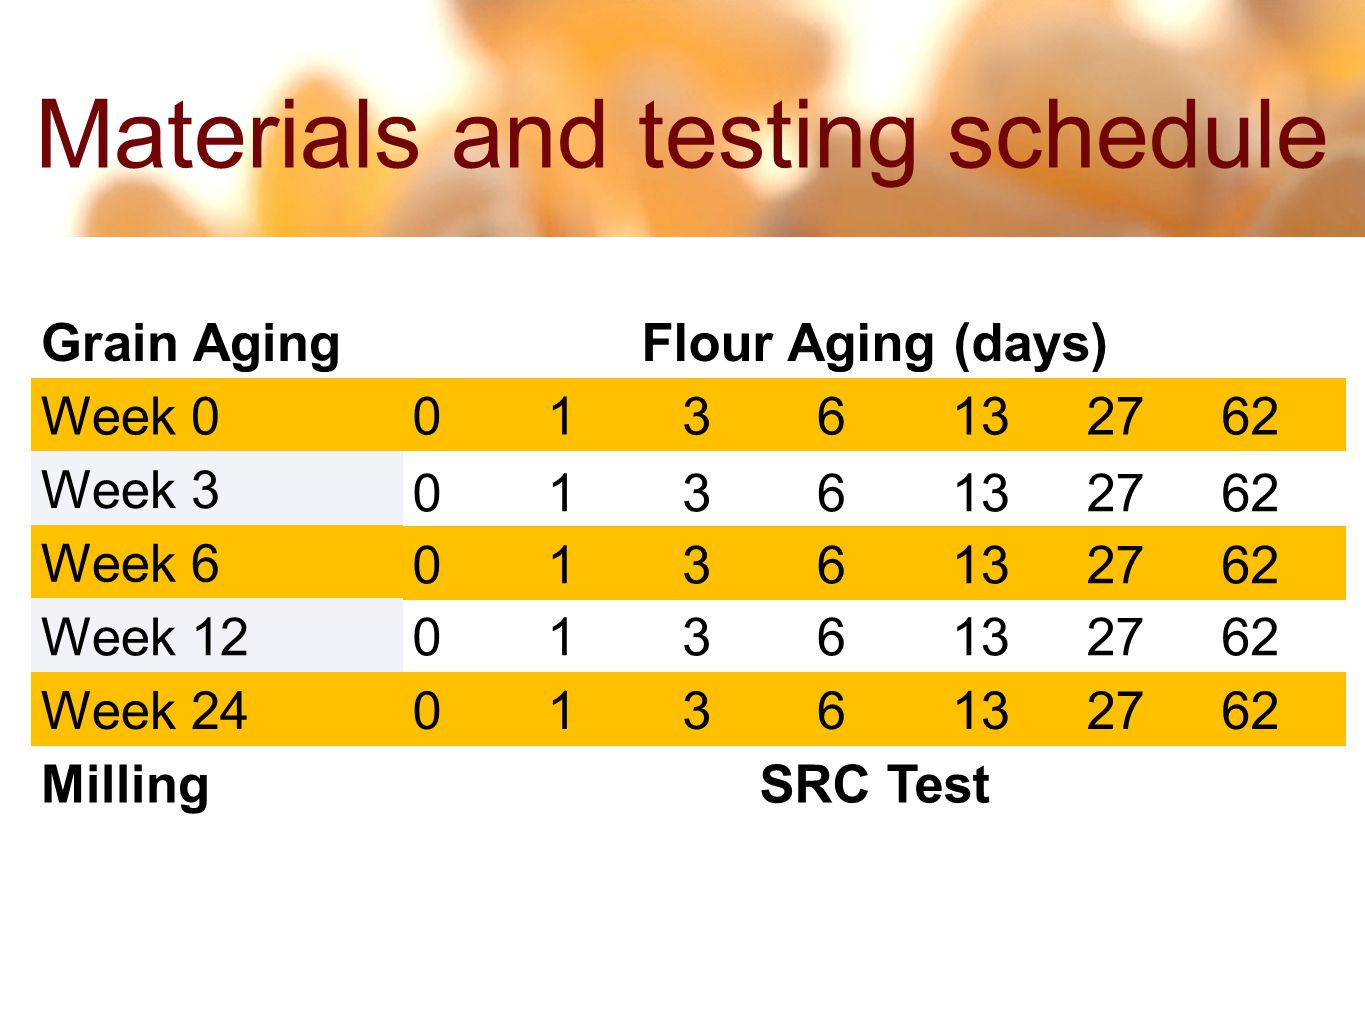 10 26 Materials and testing schedule Grain Aging Week 0 Week 3 Week 6 Week 12 Week 24 Milling Flour Aging (days) SRC Test